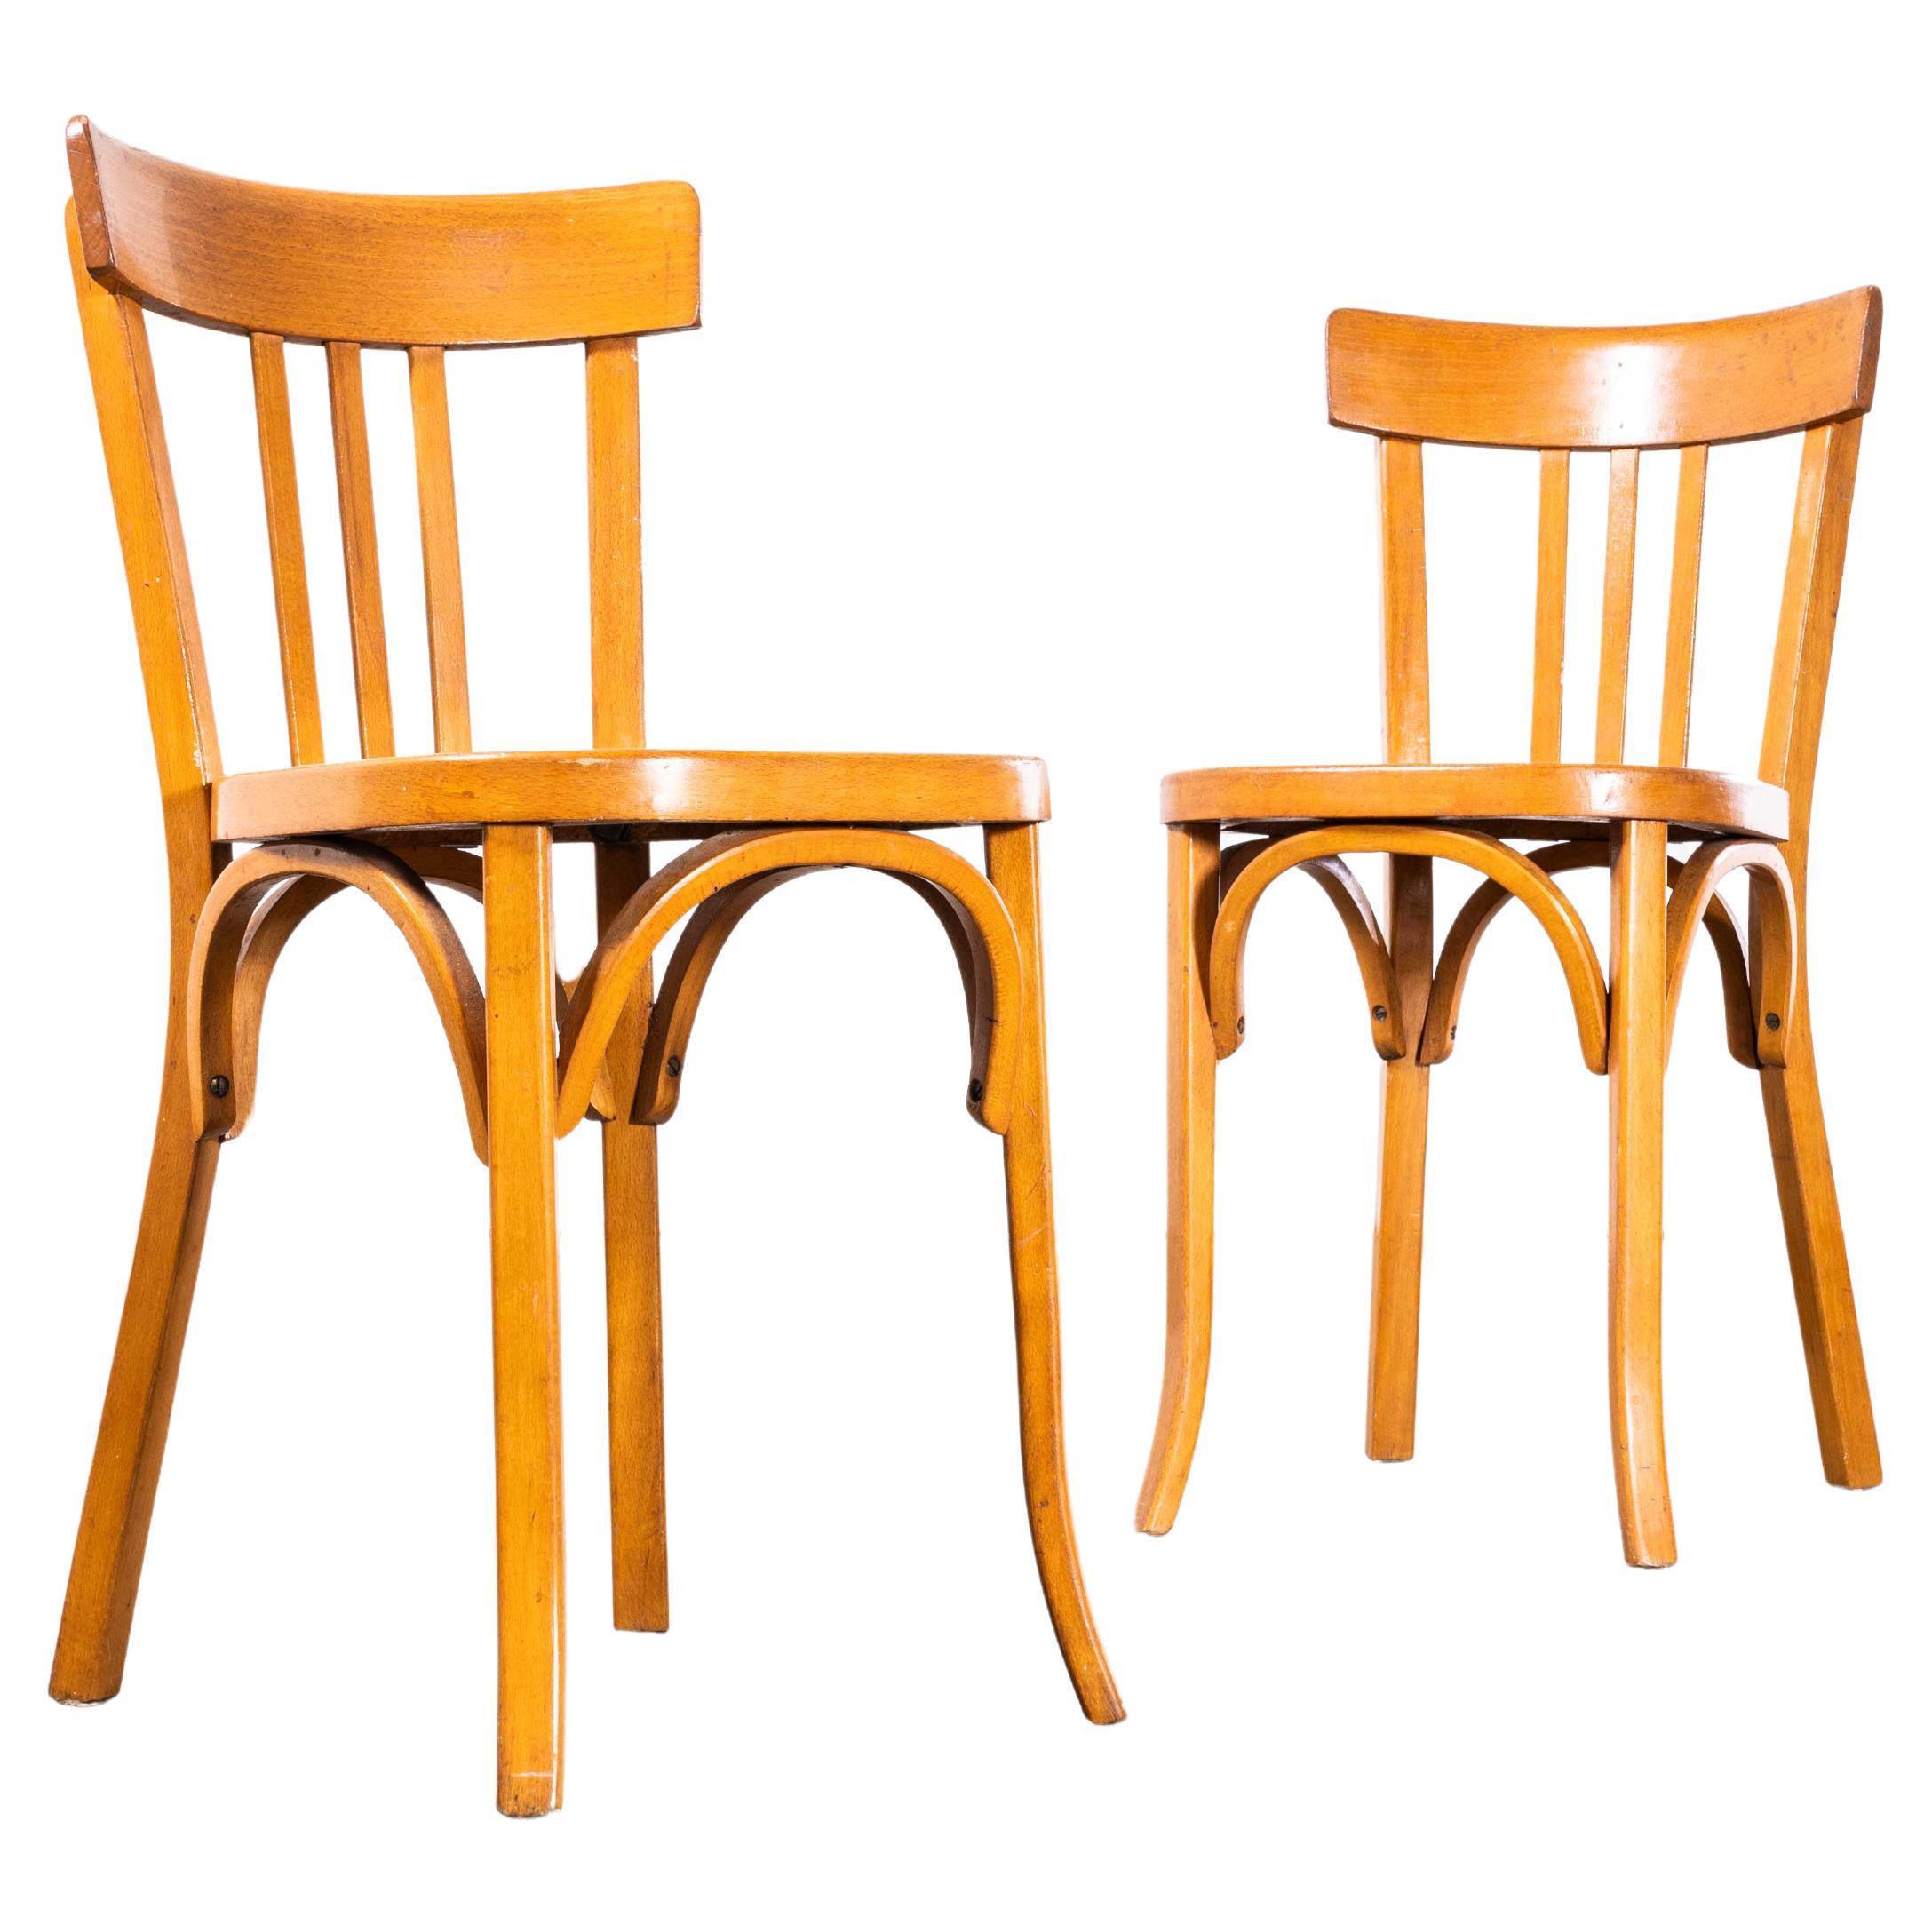 1950's Baumann Bentwood Tri Back Bistro Dining chair - Honey - Pair For Sale